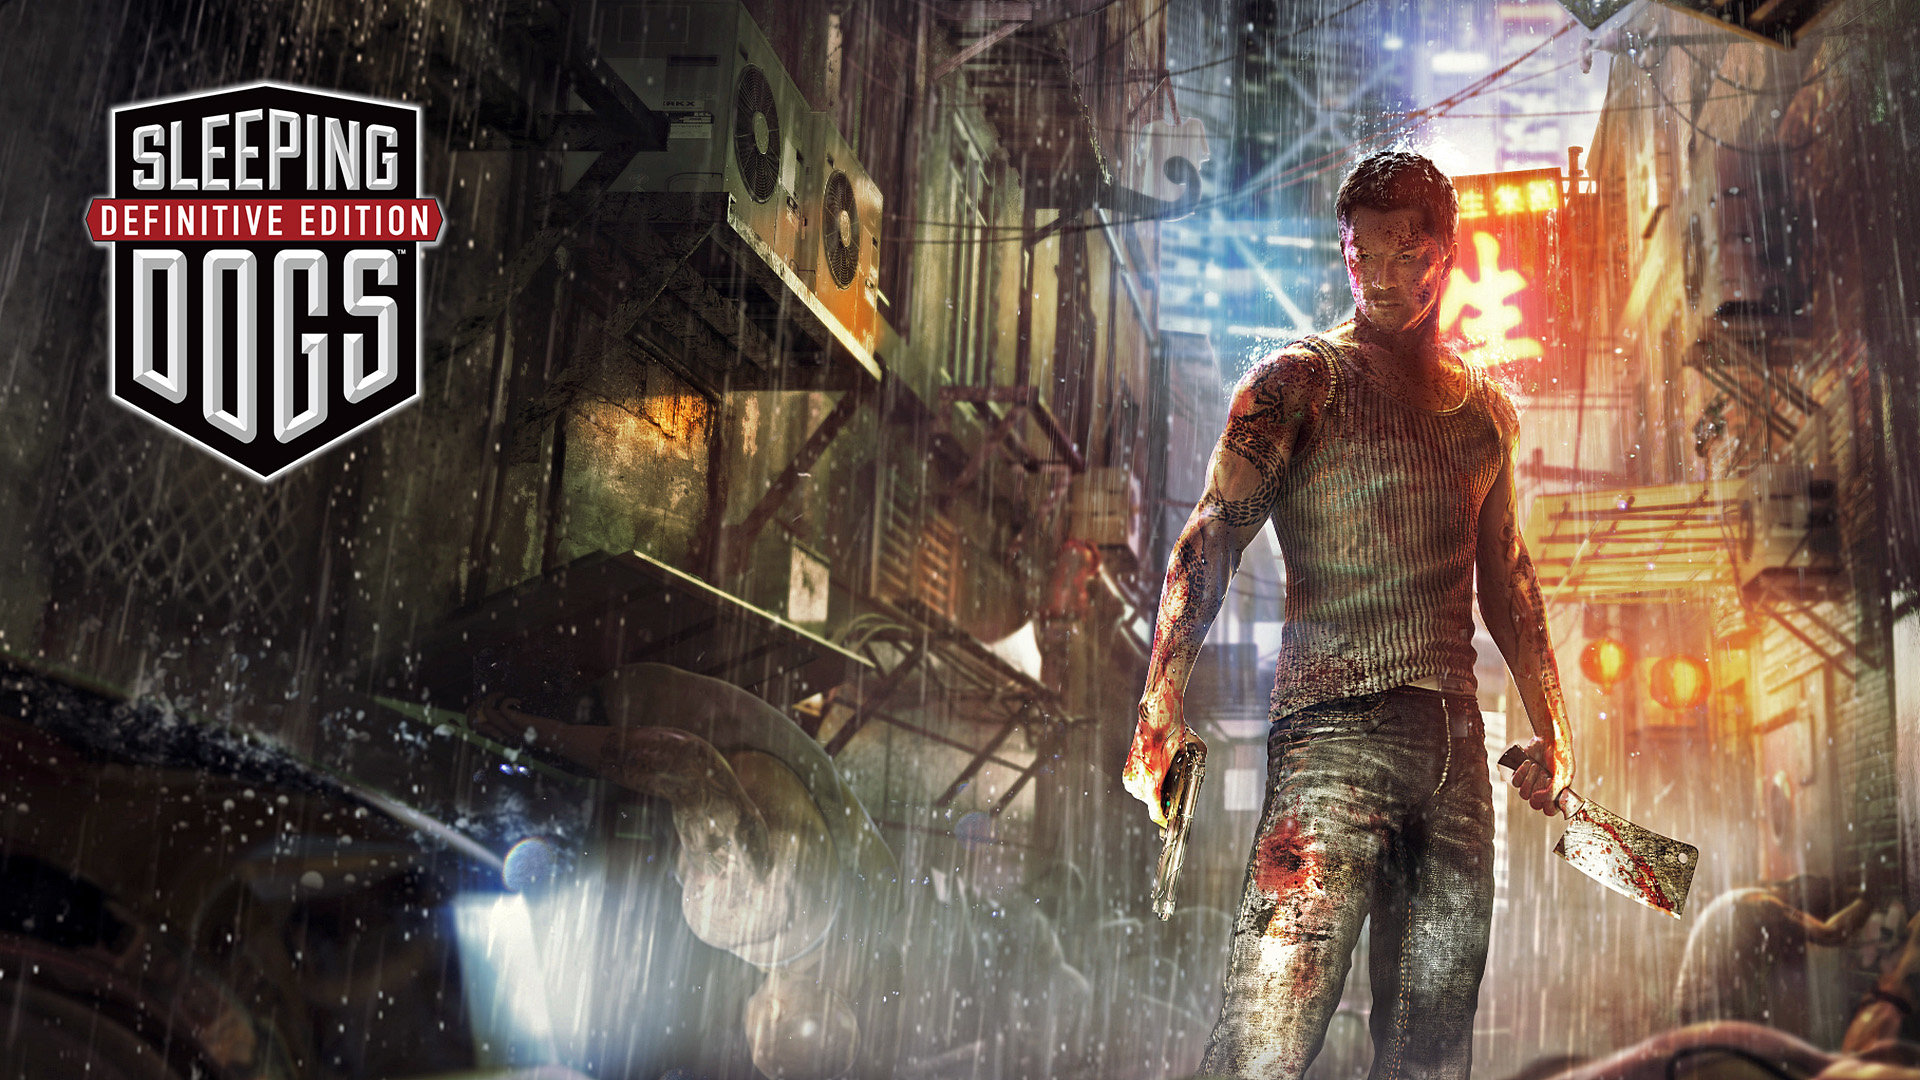 Download full hd 1920x1080 Sleeping Dogs PC wallpaper ID:346779 for free